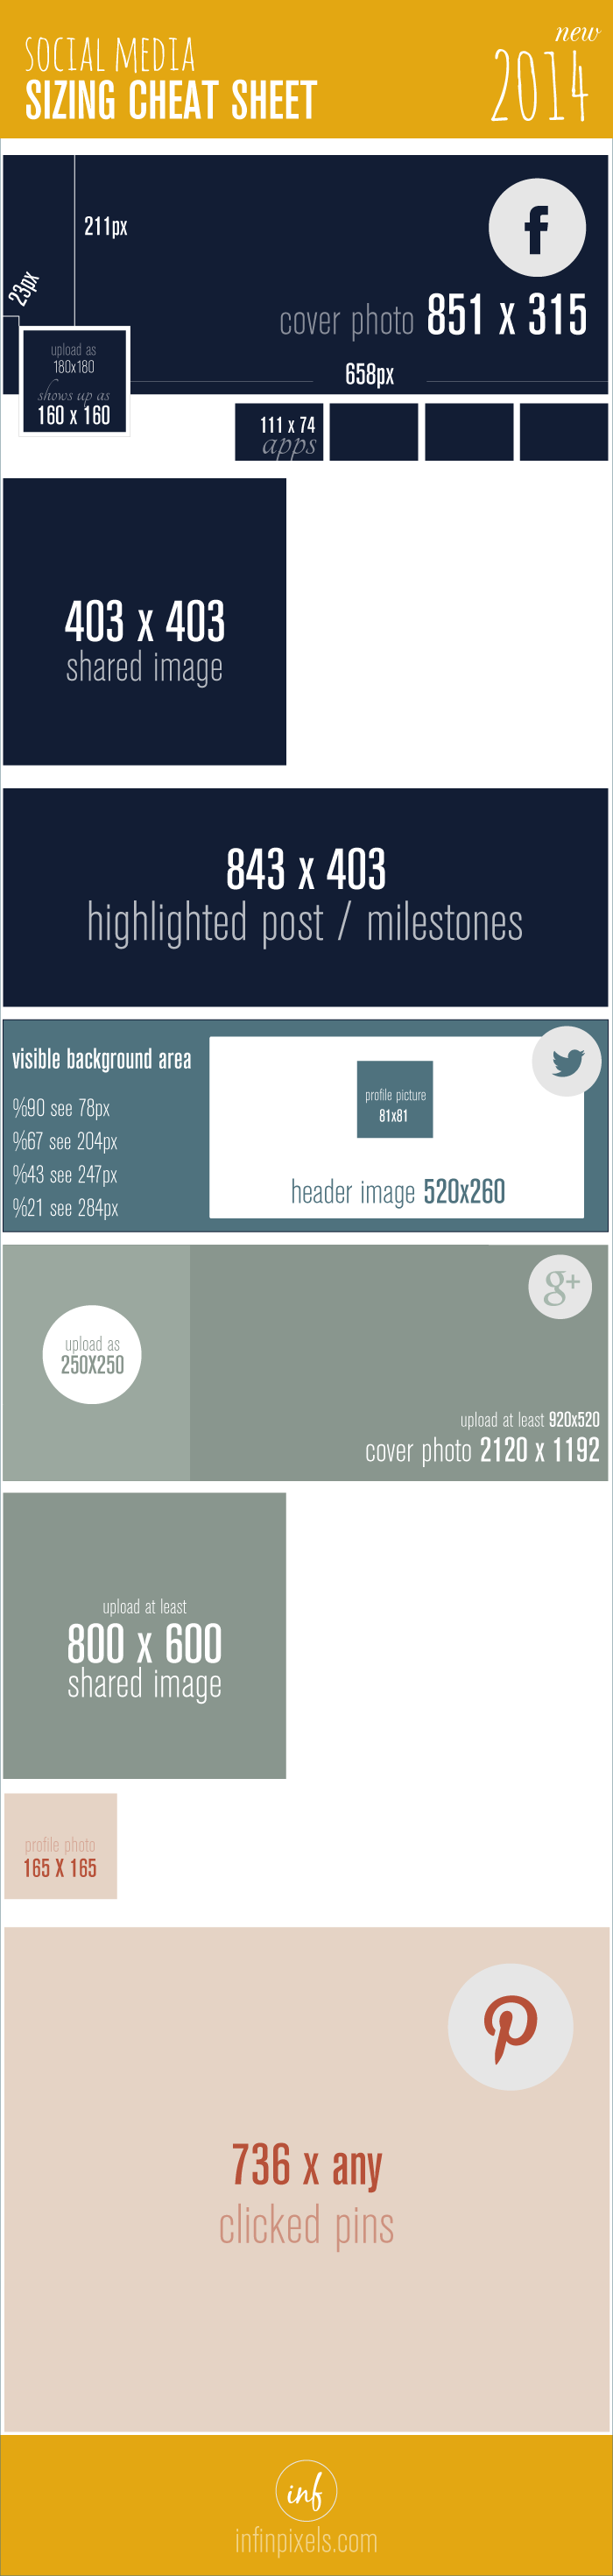 social media image size cheat sheet 2014 infographic